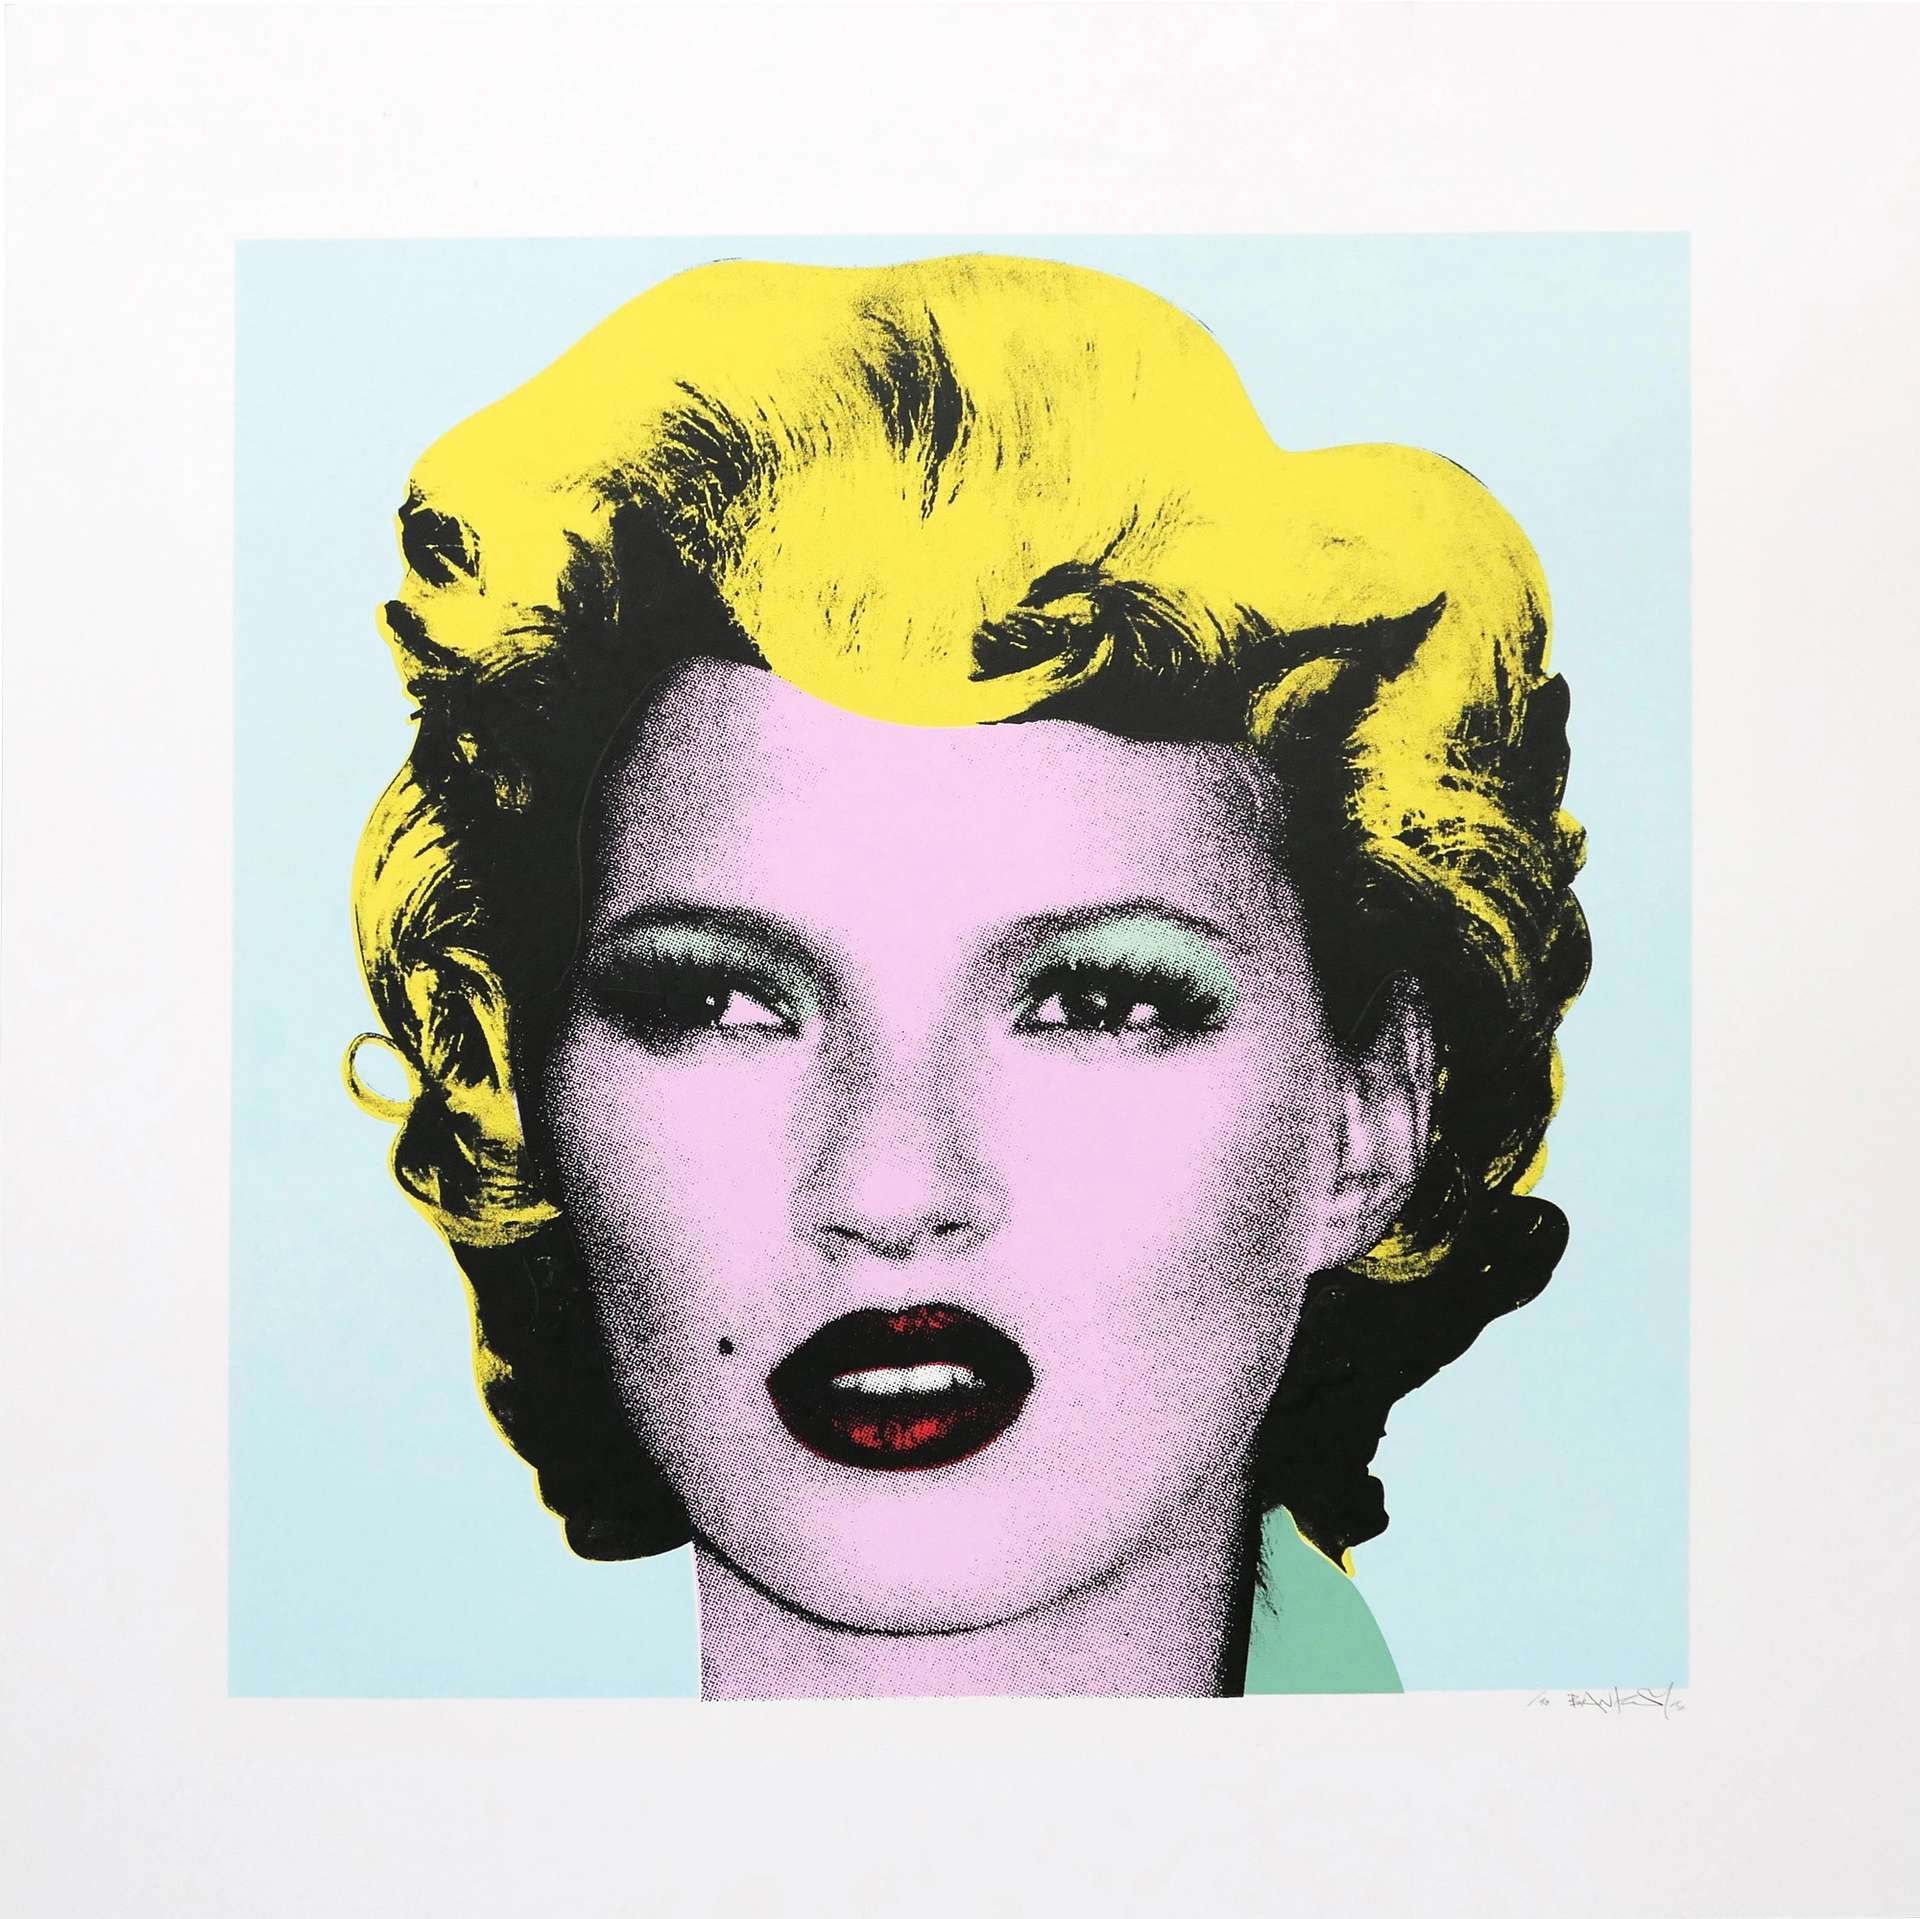 A graphic screen printed portrait of the supermodel, Kate Moss. Moss' portrait appears at the centre of the composition, her hair fashioned like Marilyn Monroe's. The colour palette is bold and unnatural, mimicking the celebrity portraits executed by Pop Artist Andy Warhol.